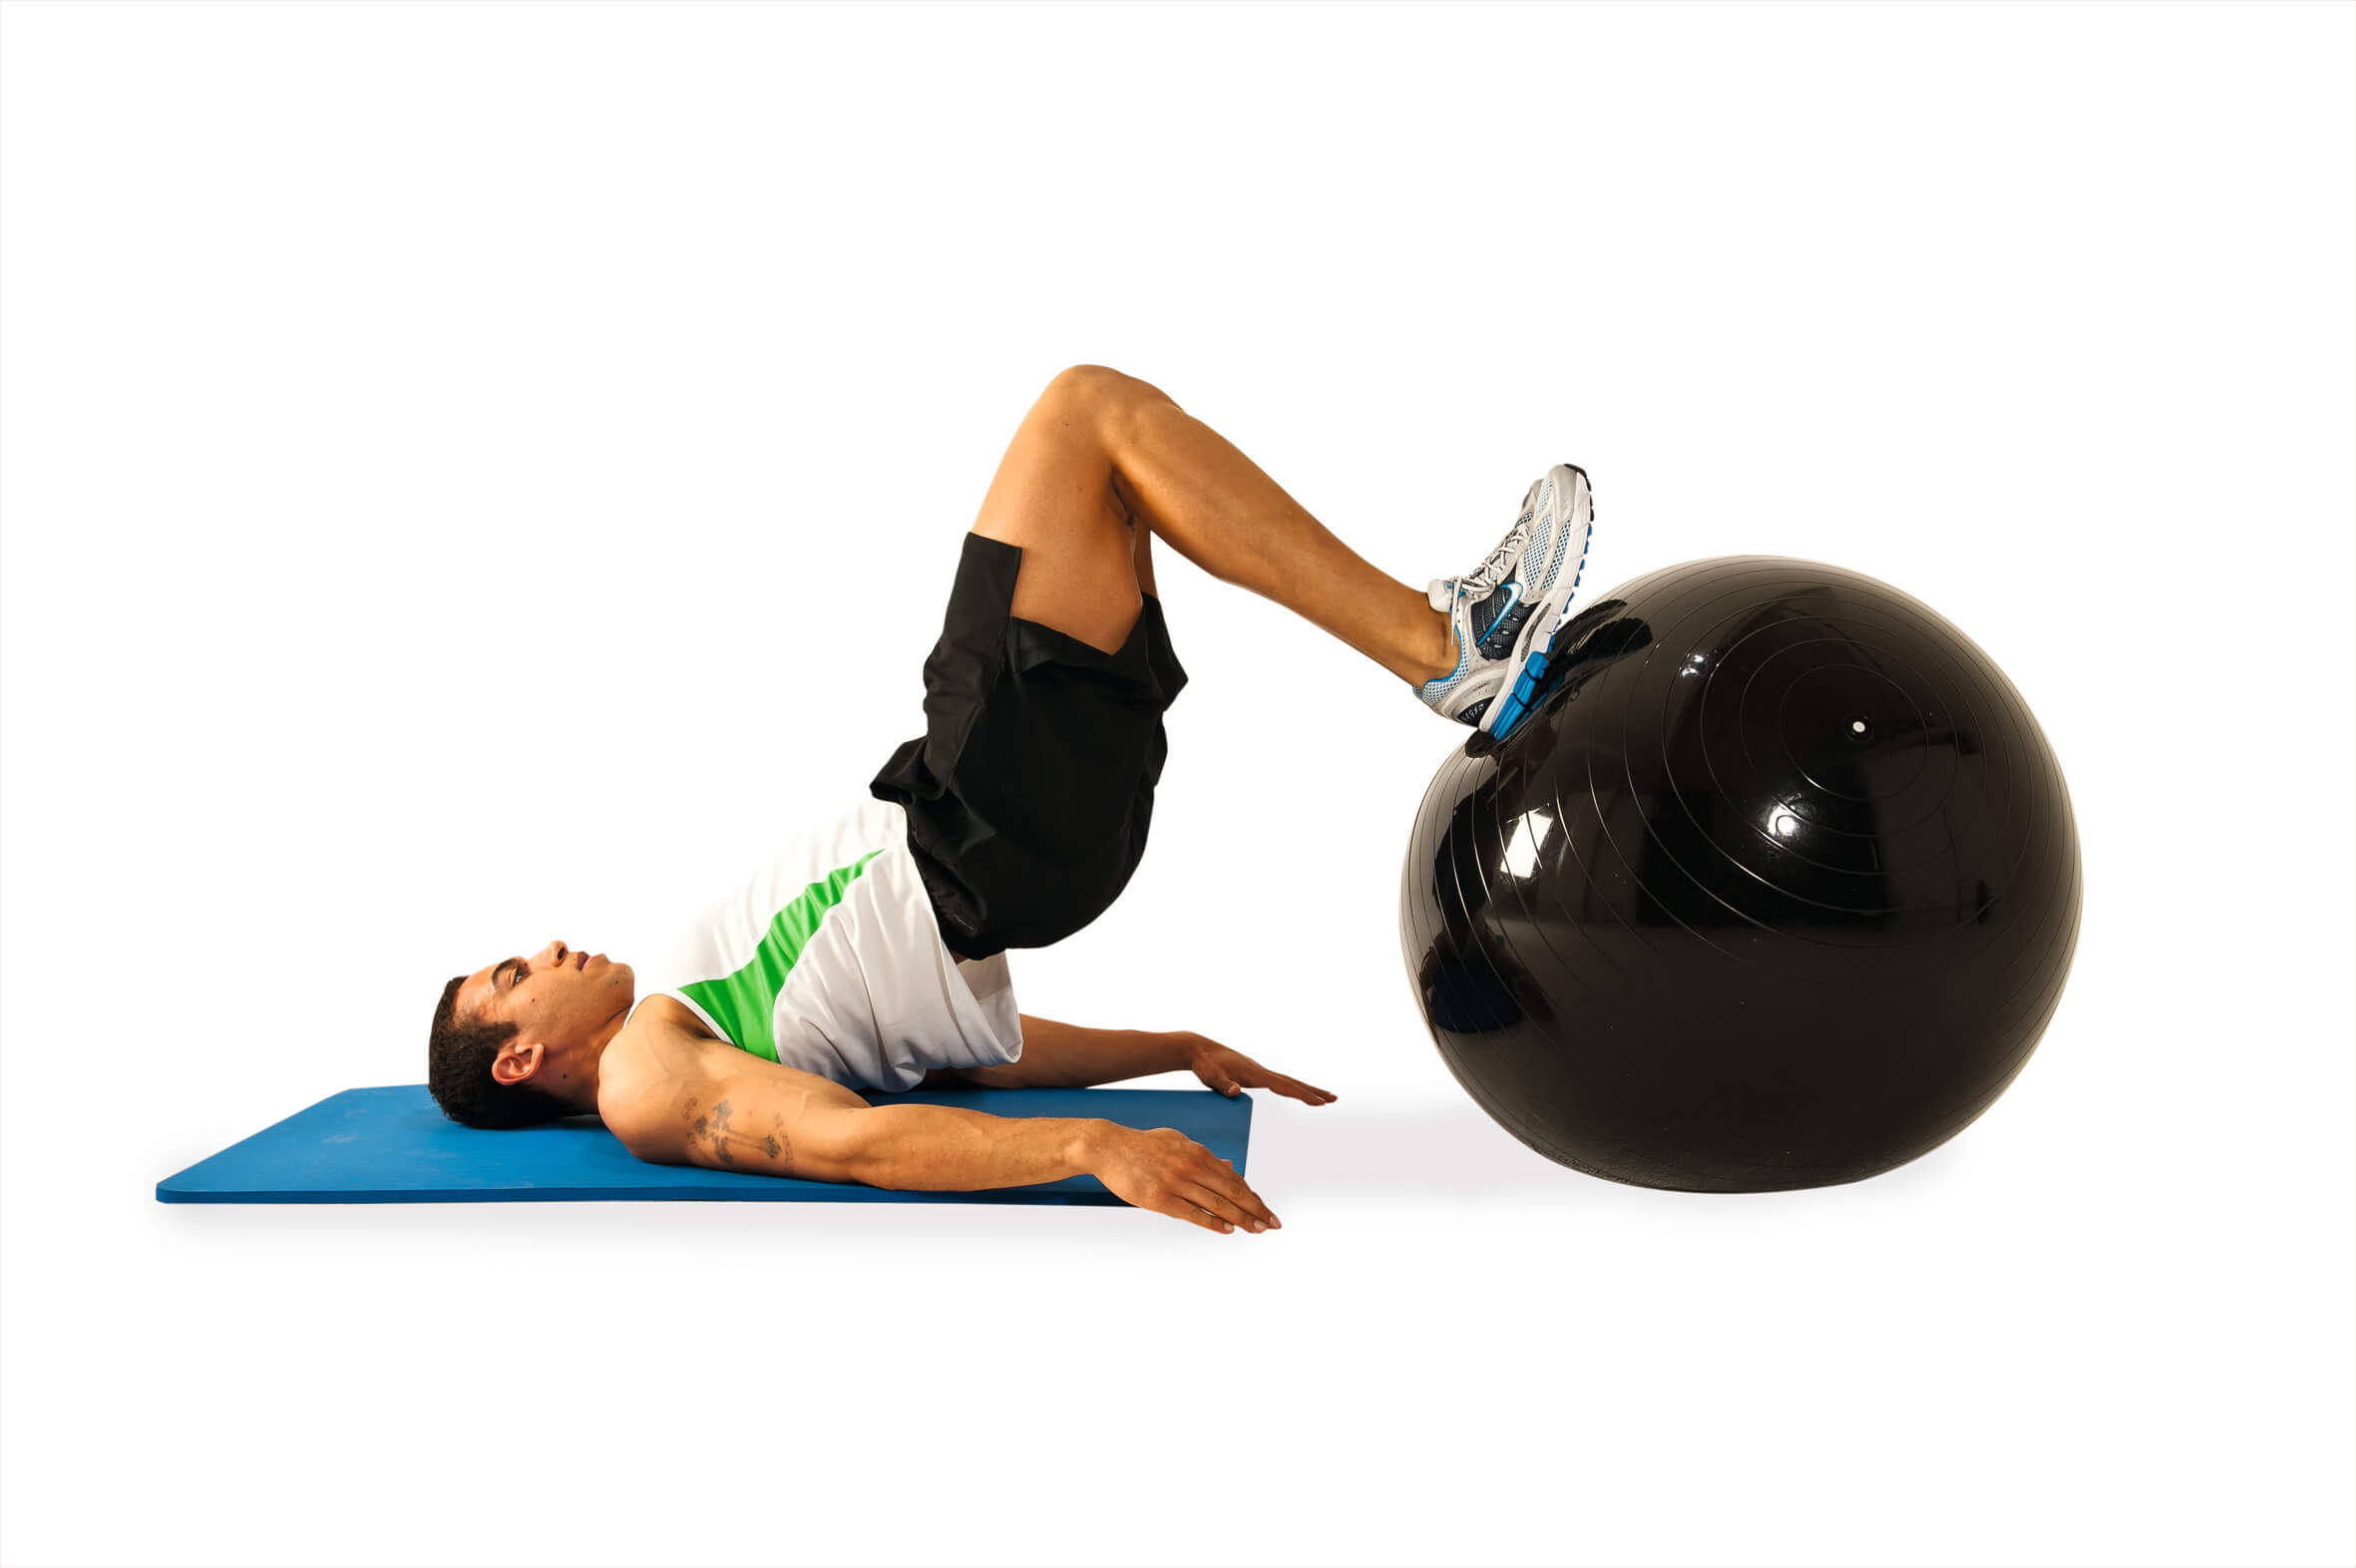 Get Fit In 15 With This Quick Swiss Ball Workout | Men's Fitness UK